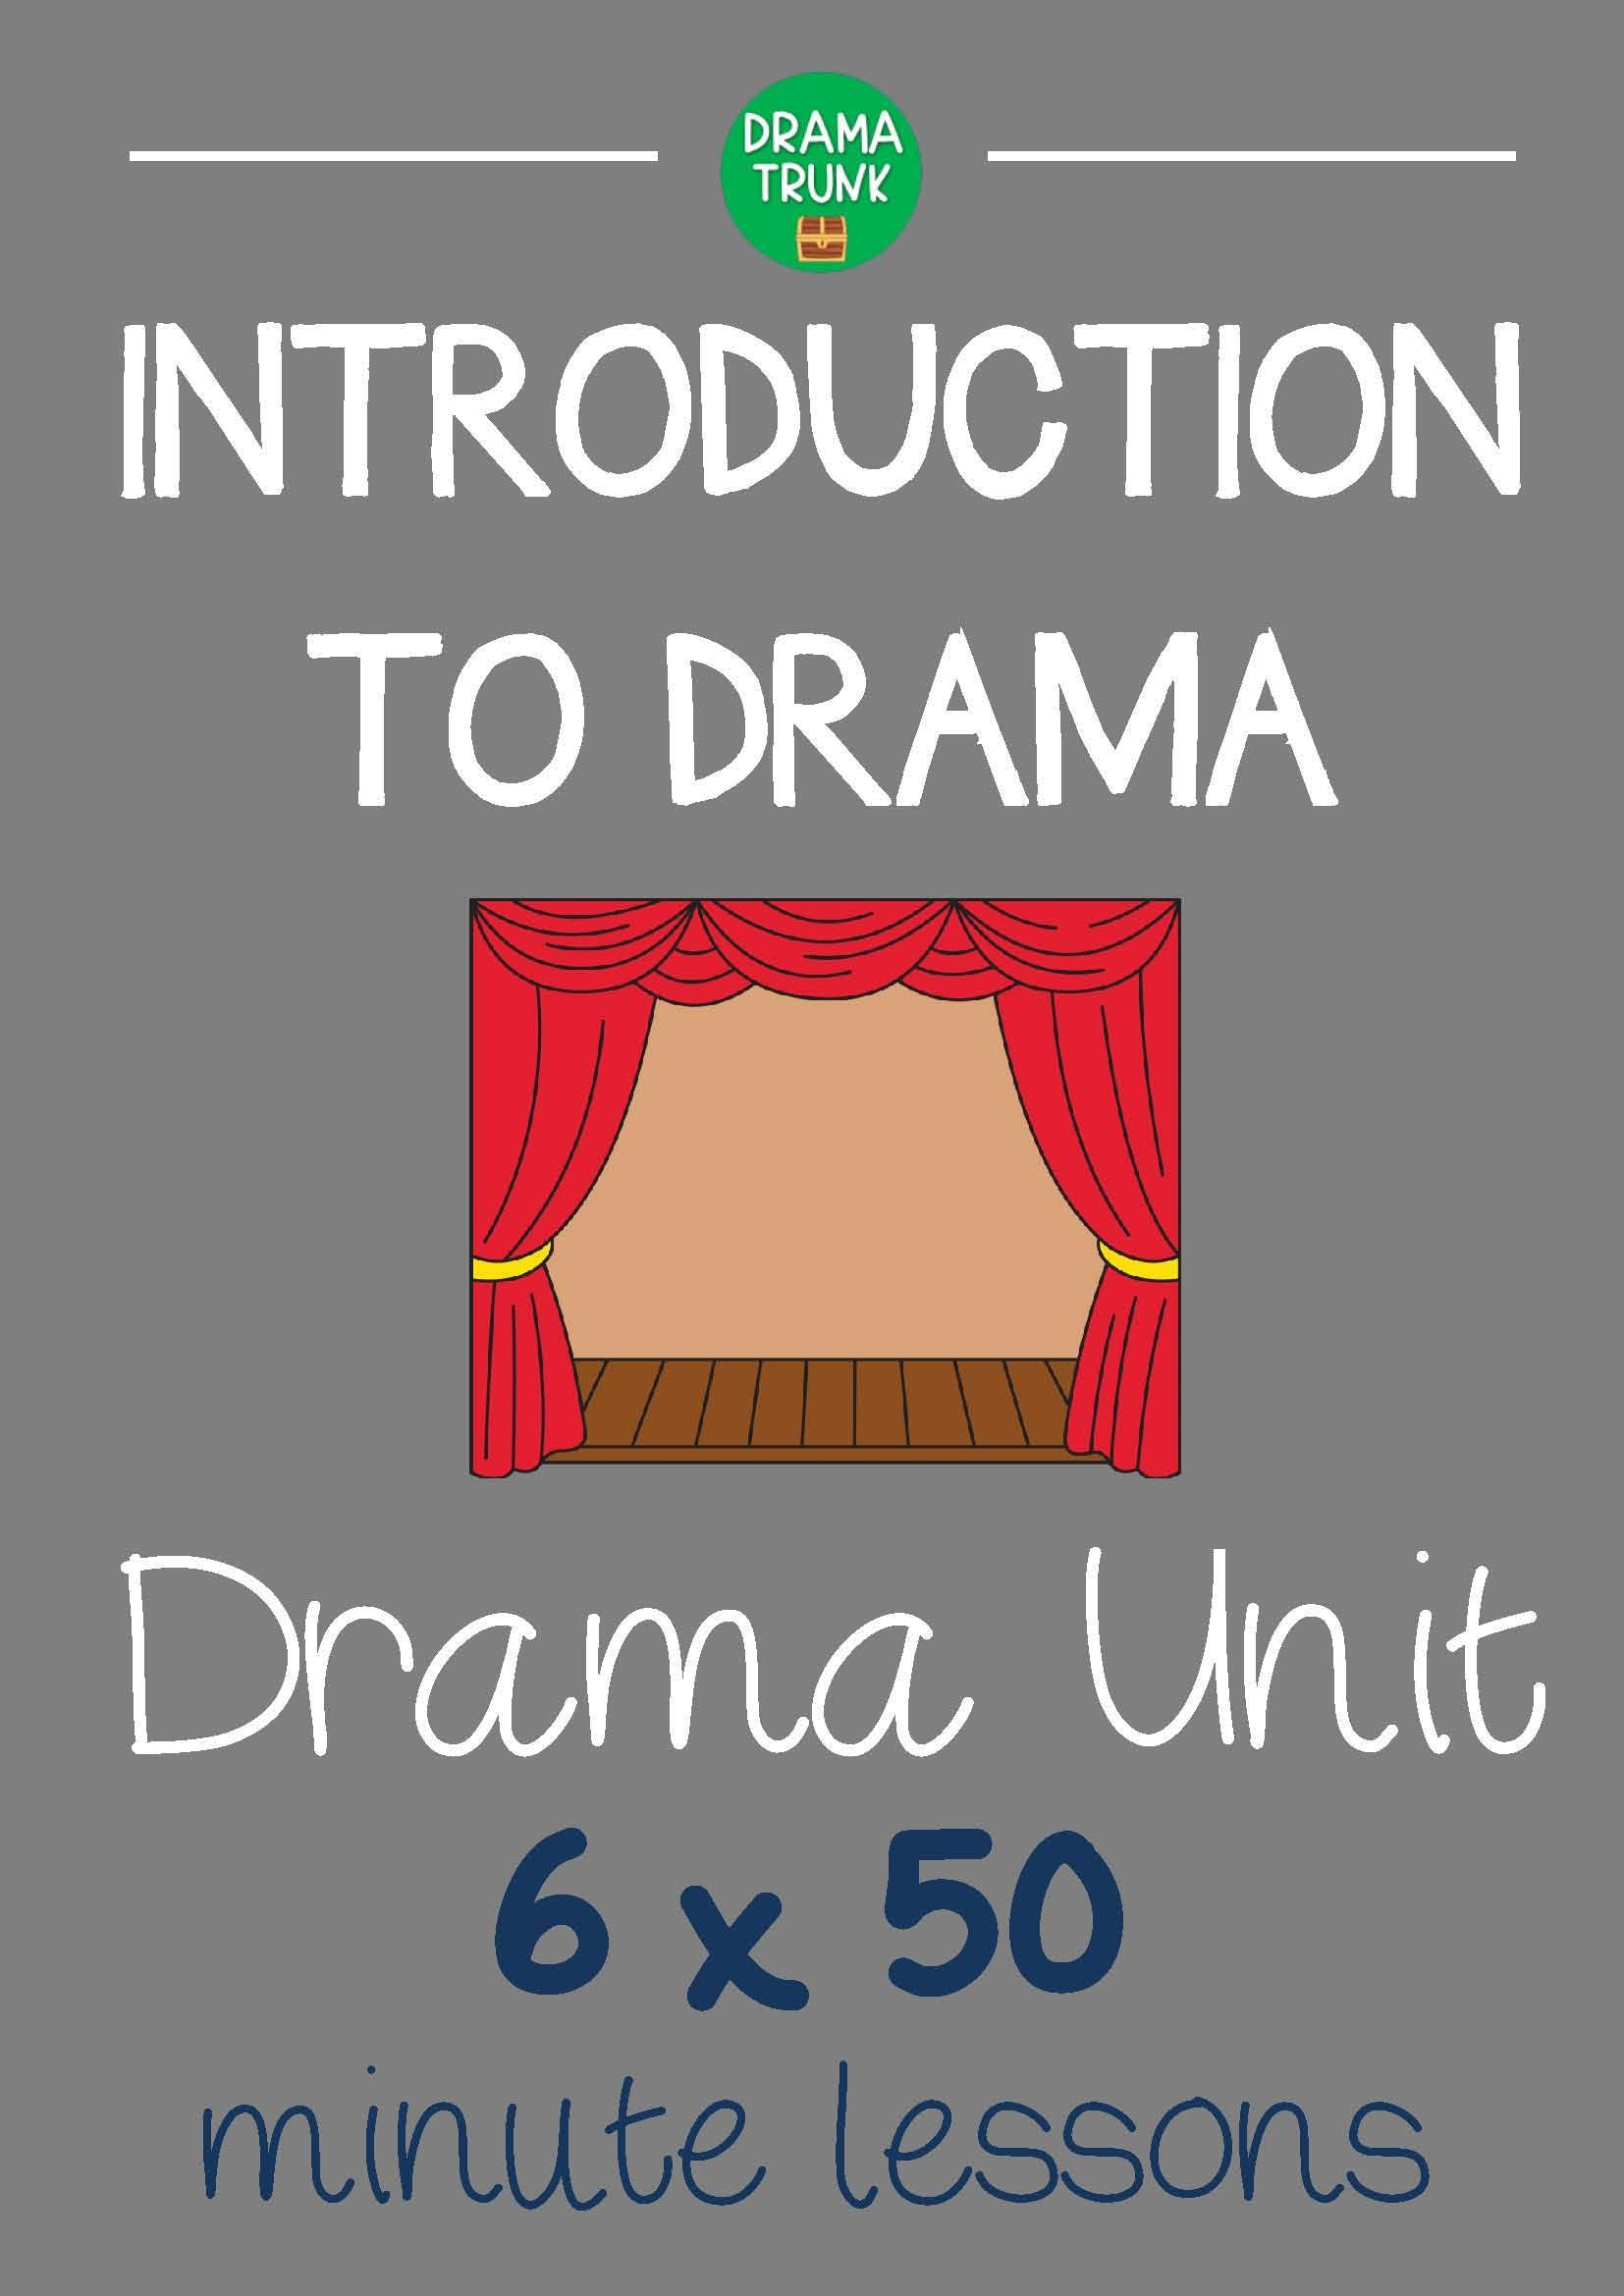 Full Drama Lesson Plans - 6 X 50 Minute Introduction To